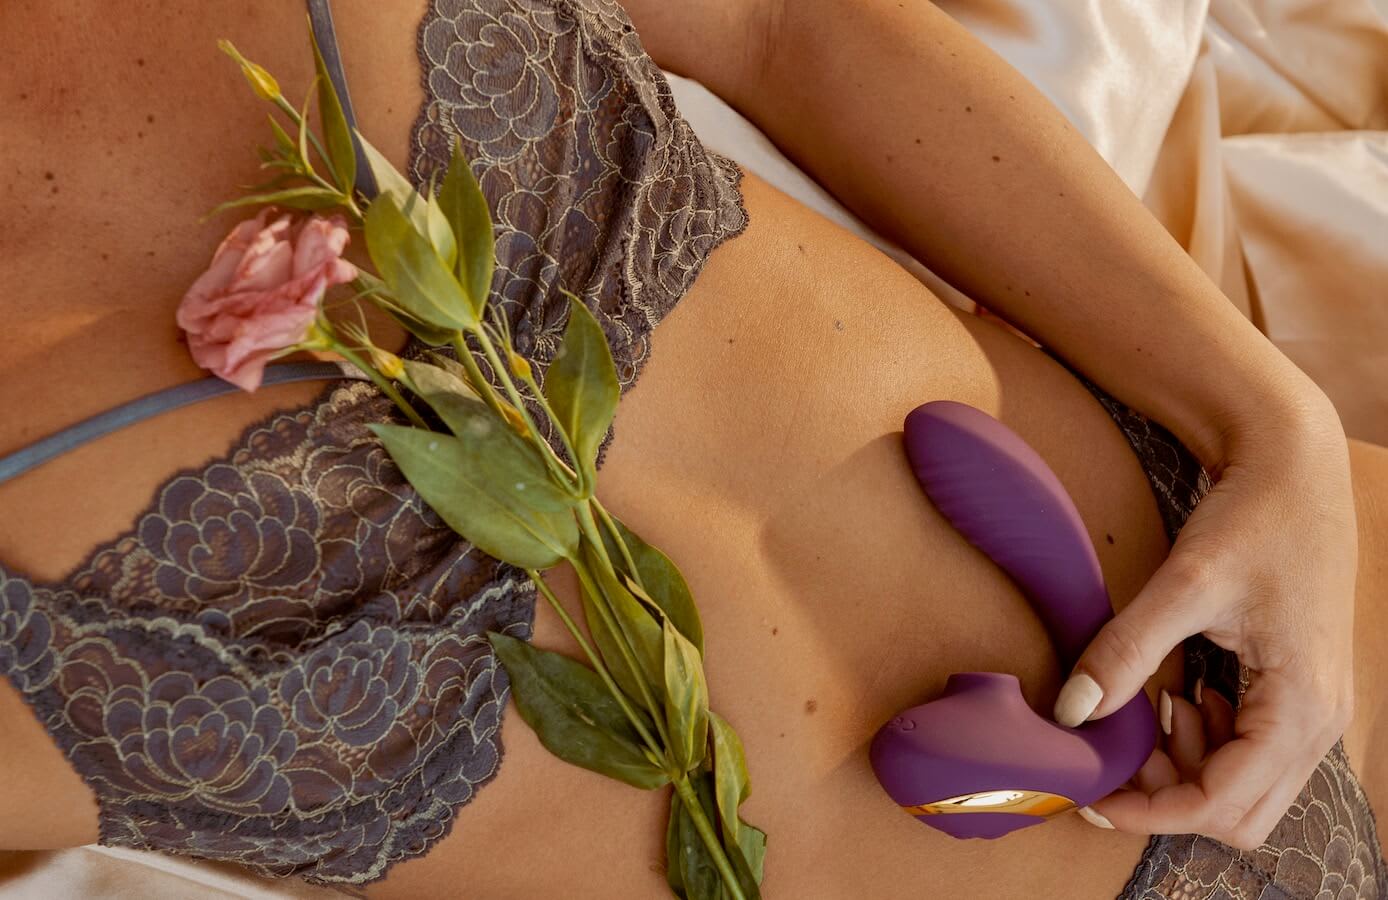 15 amazing sex toys to treat yourself to this Valentines Day Bellesa pic